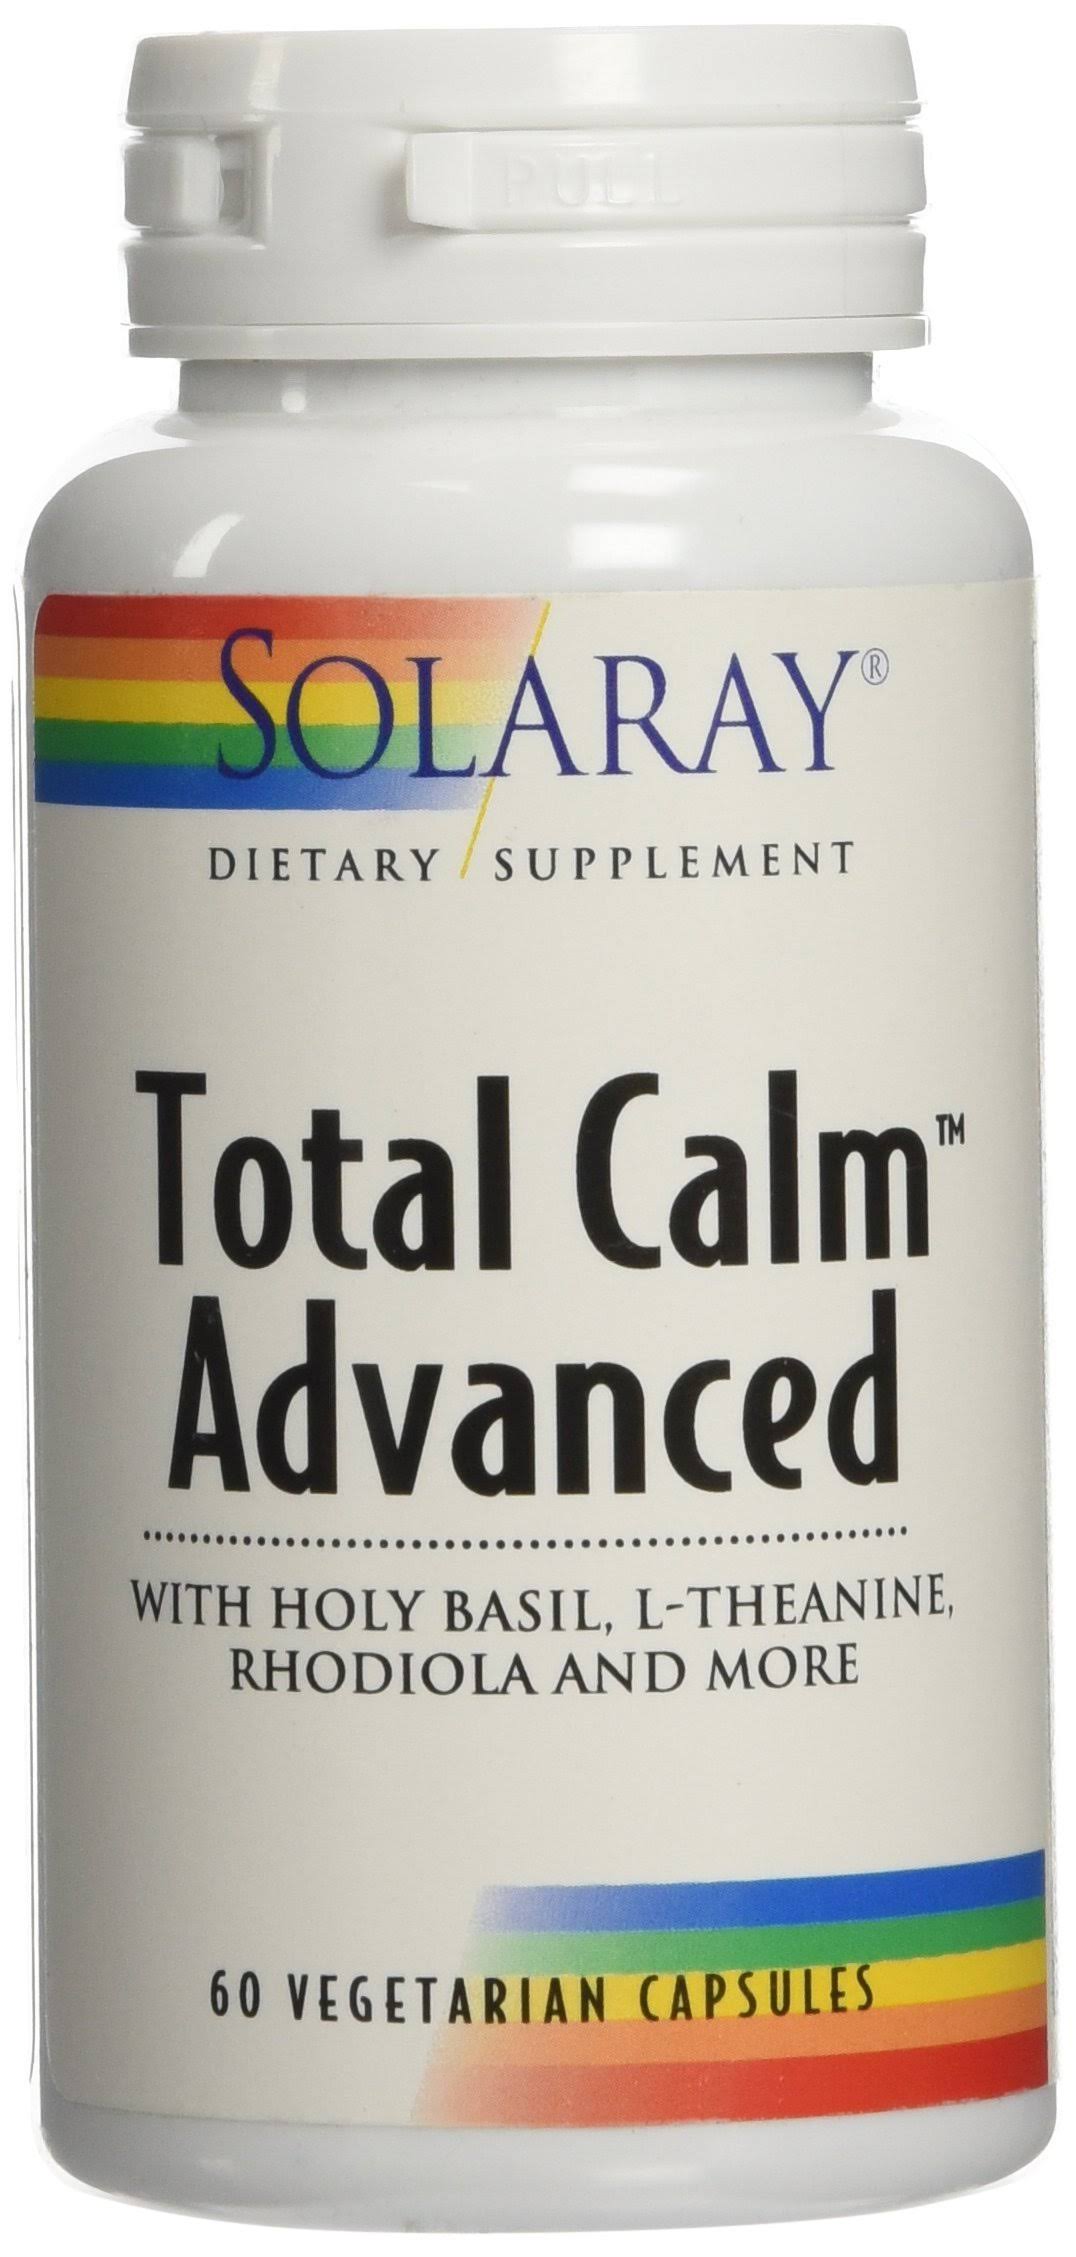 Solaray Total Calm Advanced Dietary Supplement - 60 Capsules